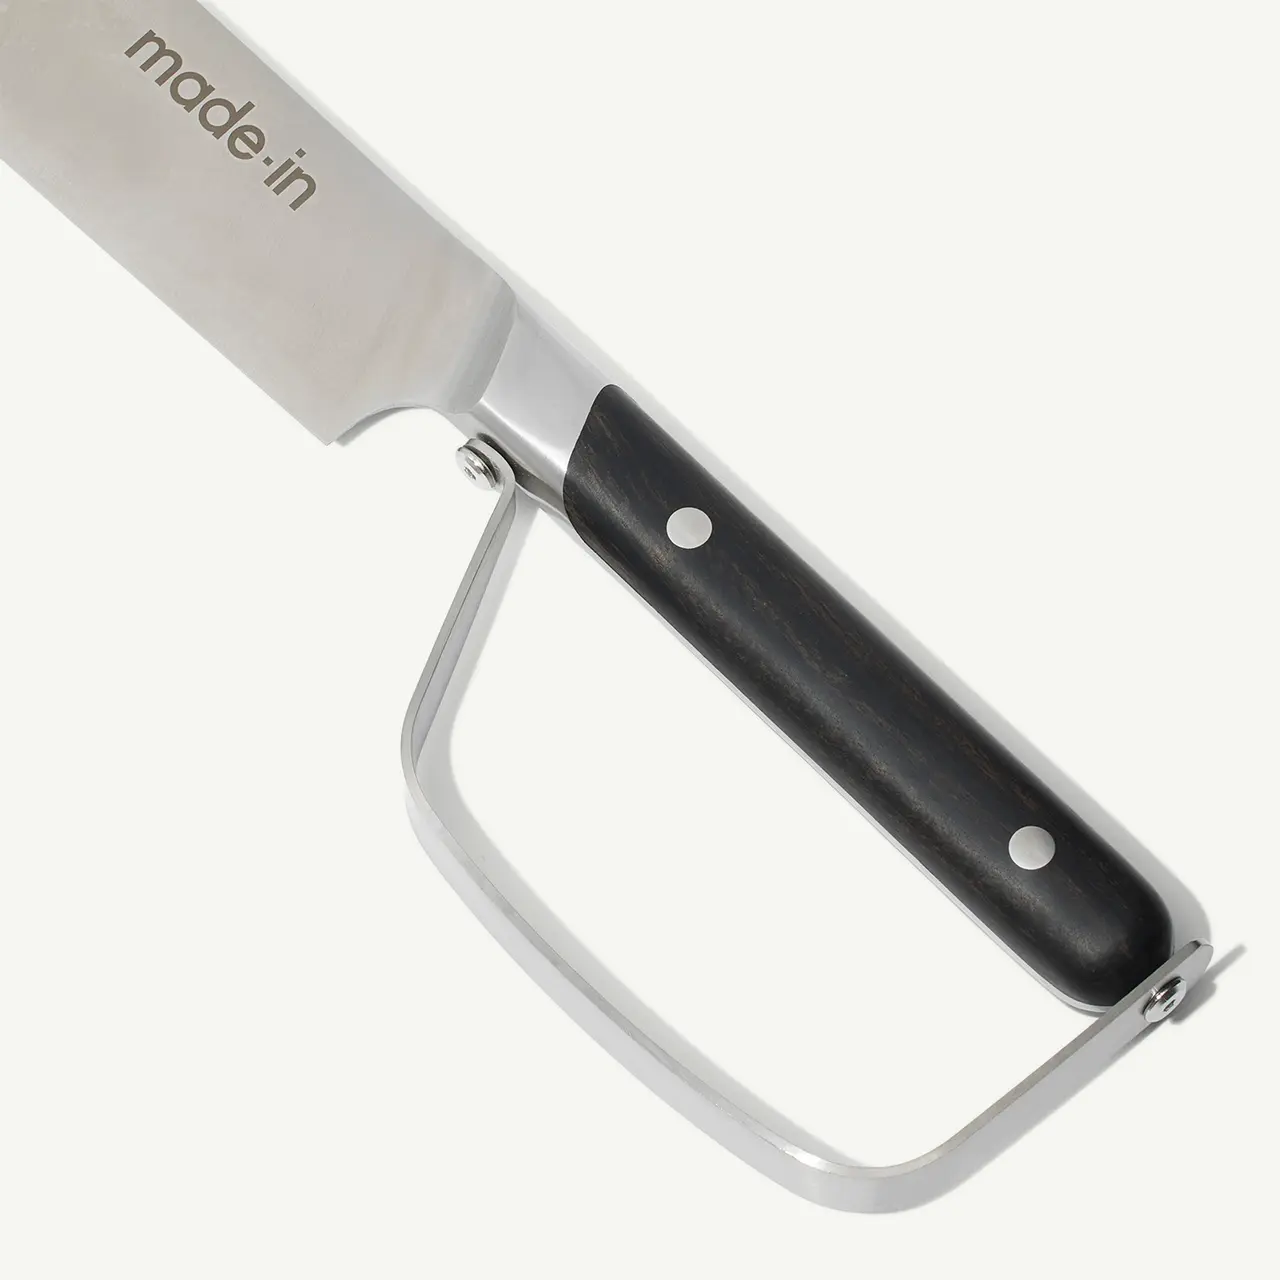 A close-up of a cheese slicer with a stainless steel blade and black handle against a white background.